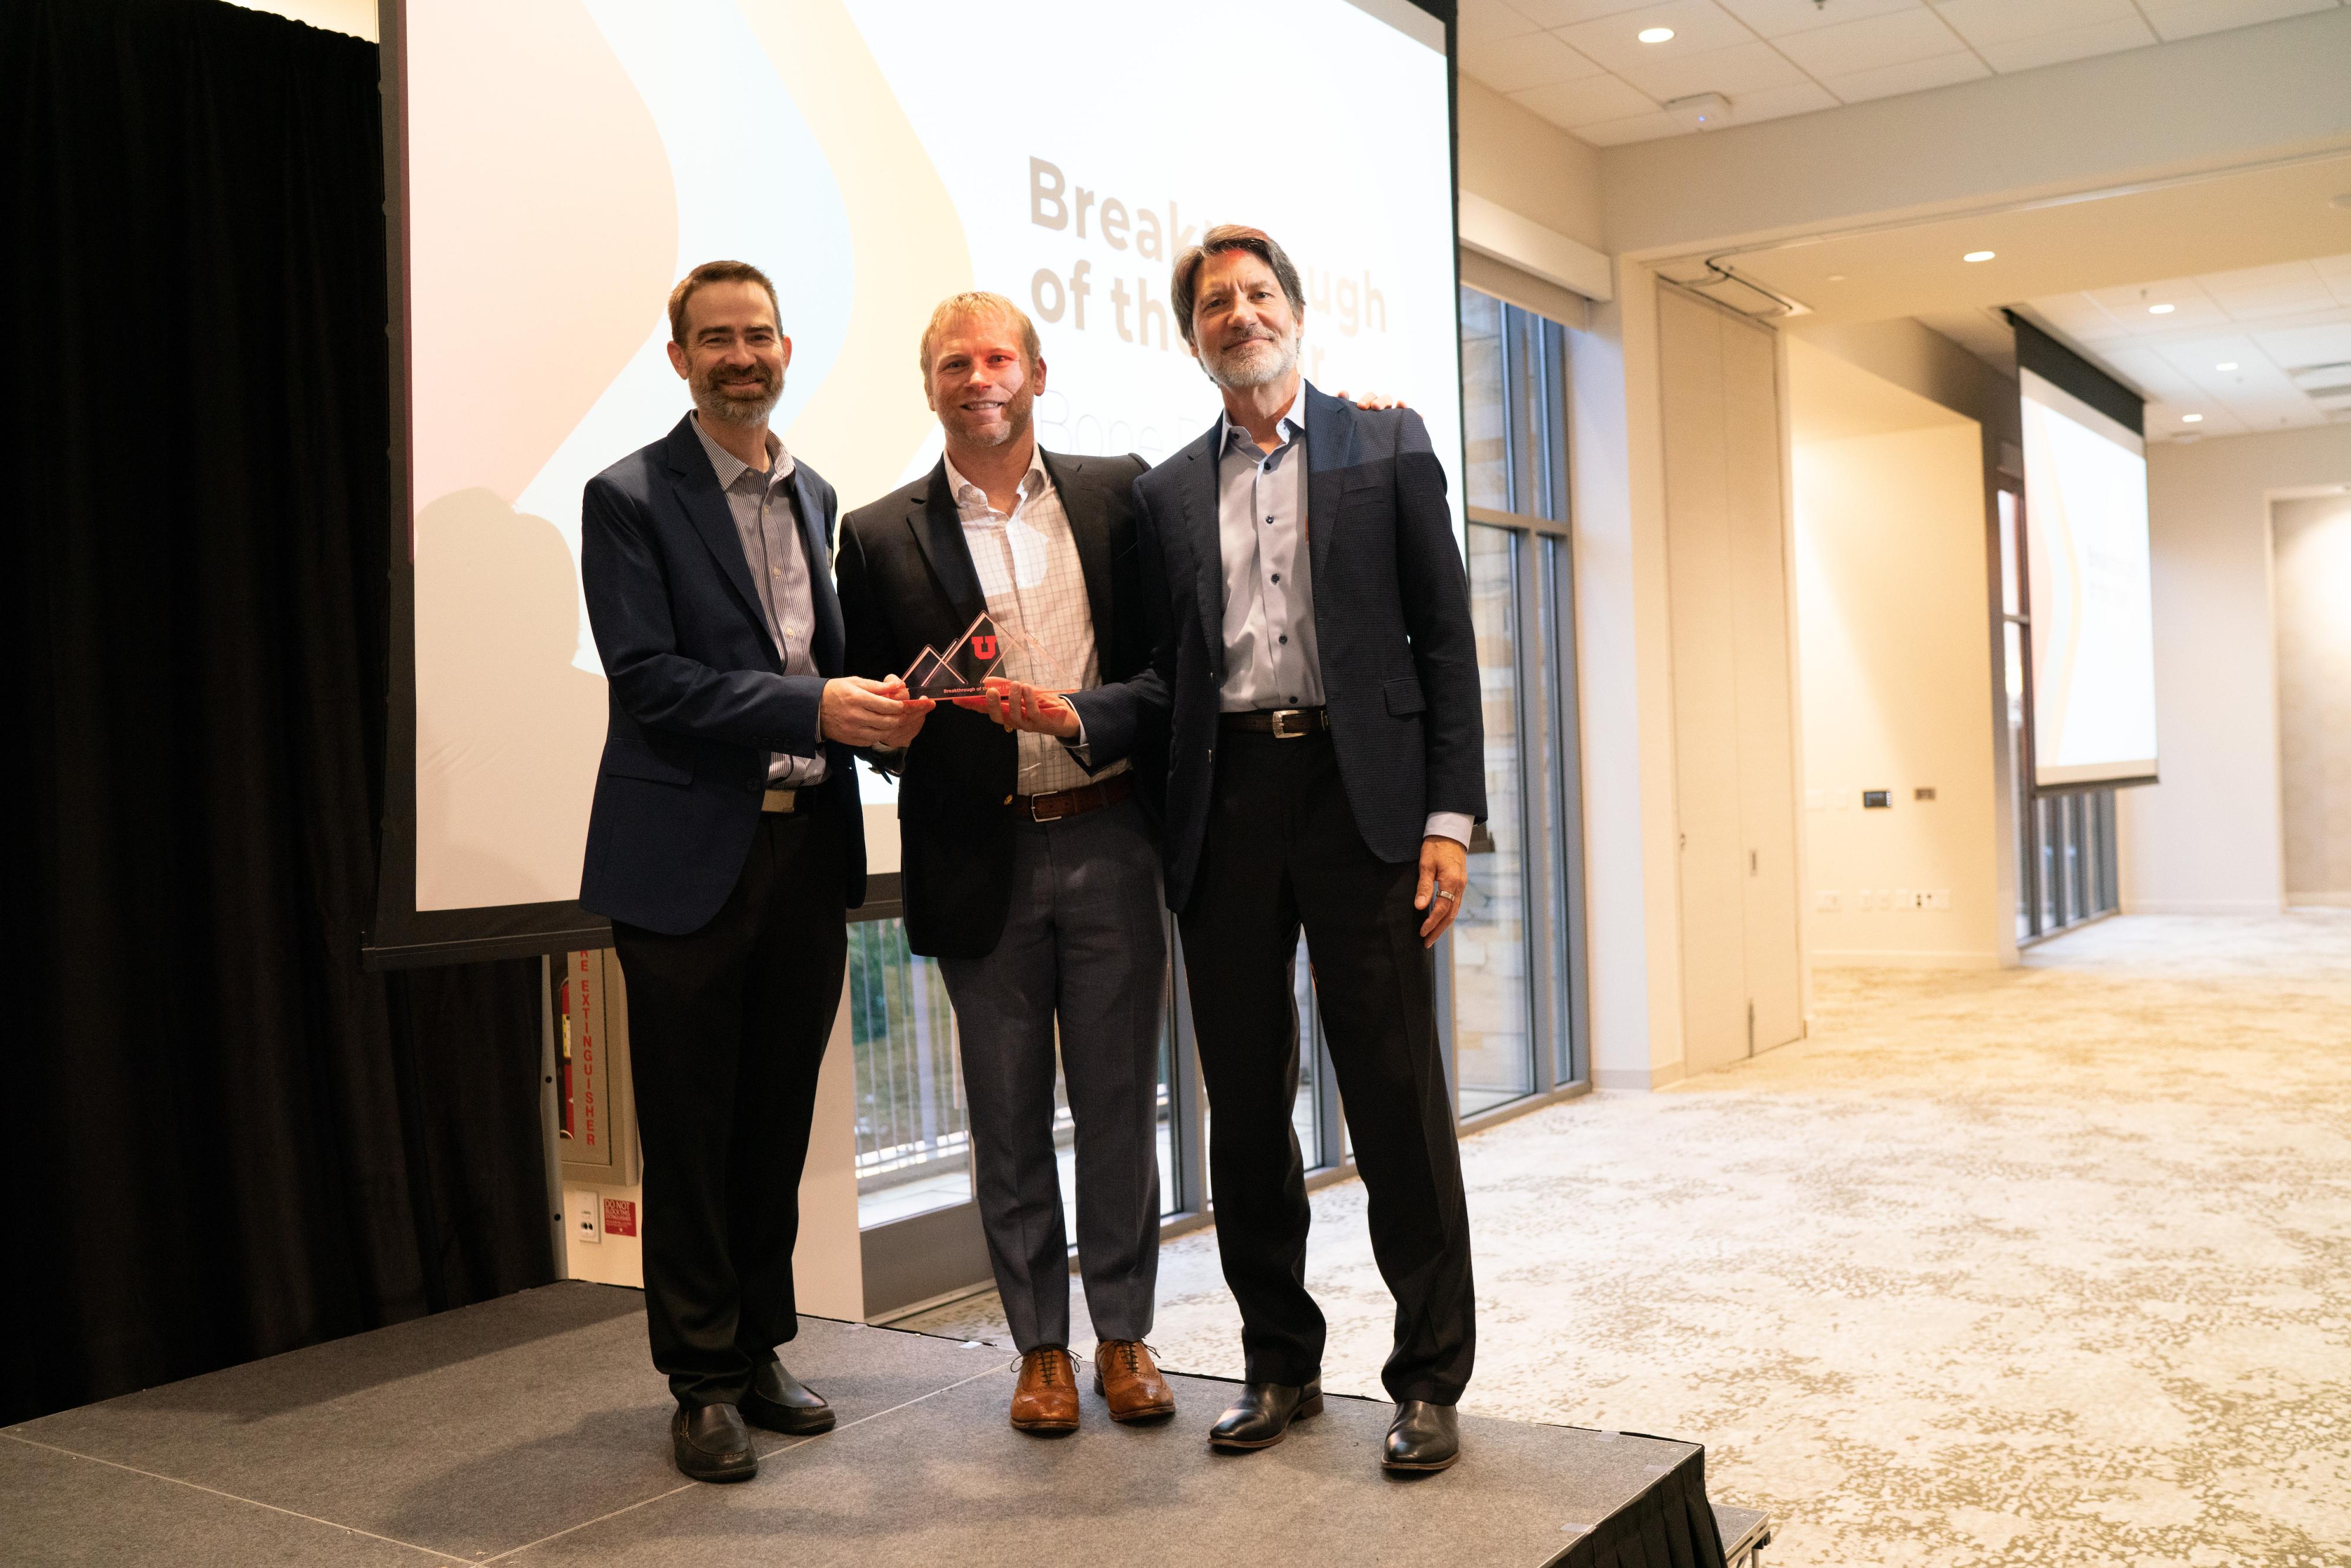 Wade Fallin, Colin Gregersen and Justin Haller, MD, at the Orthopaedic Innovation Center receiving the University of Utah Breakthrough of the Year award.